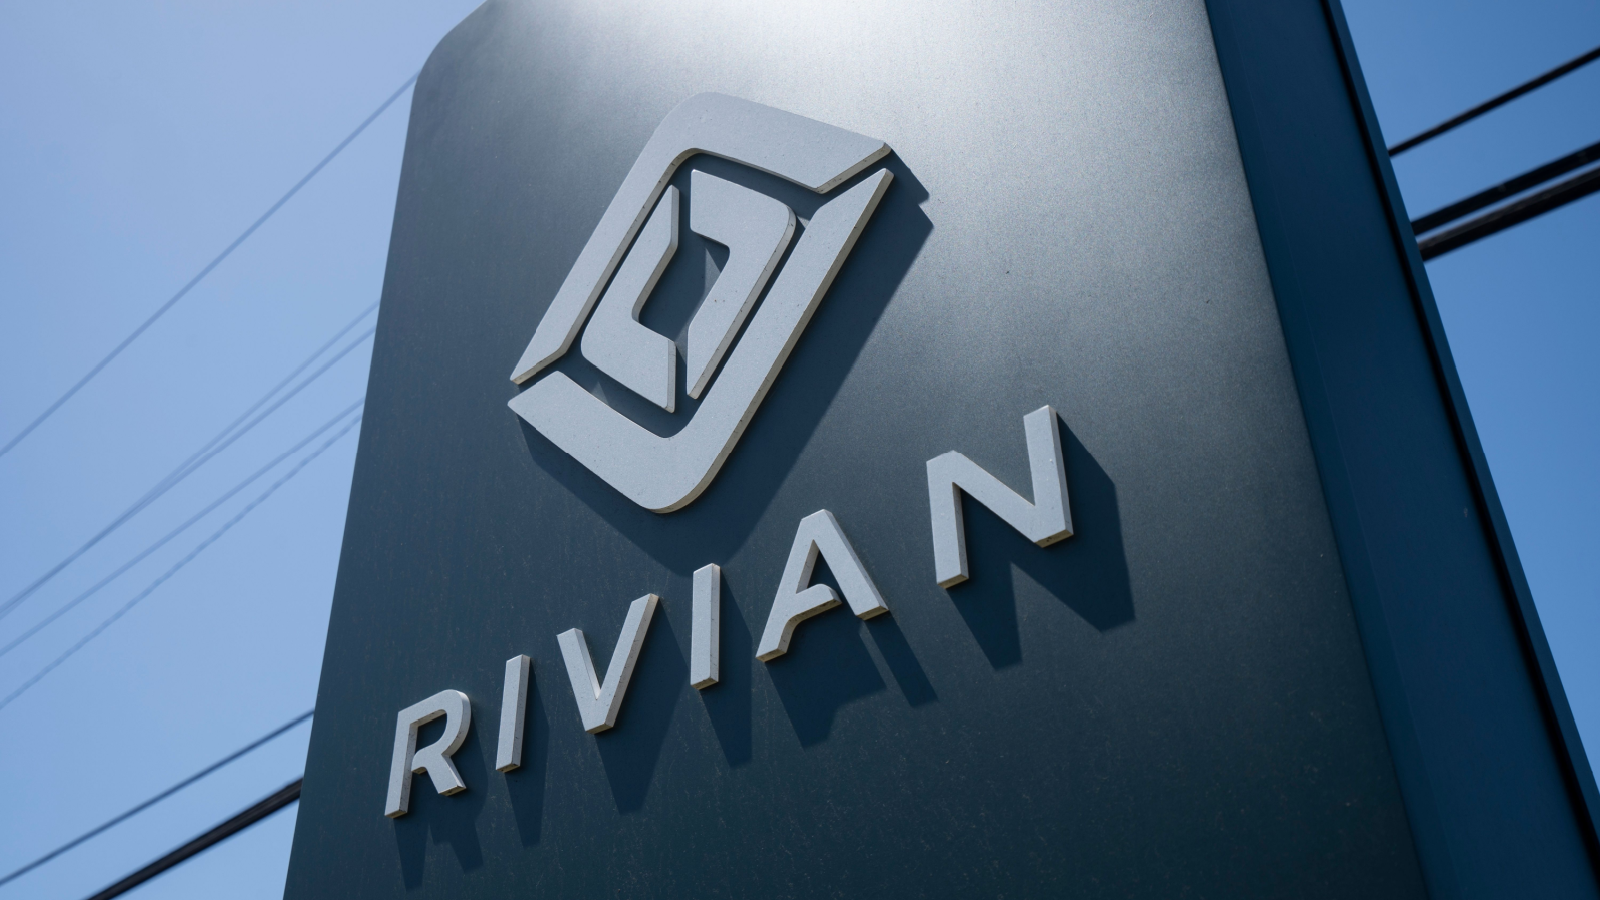 From Startup to Superstar: Rivian's Volkswagen Deal Could Make It the Next EV Giant